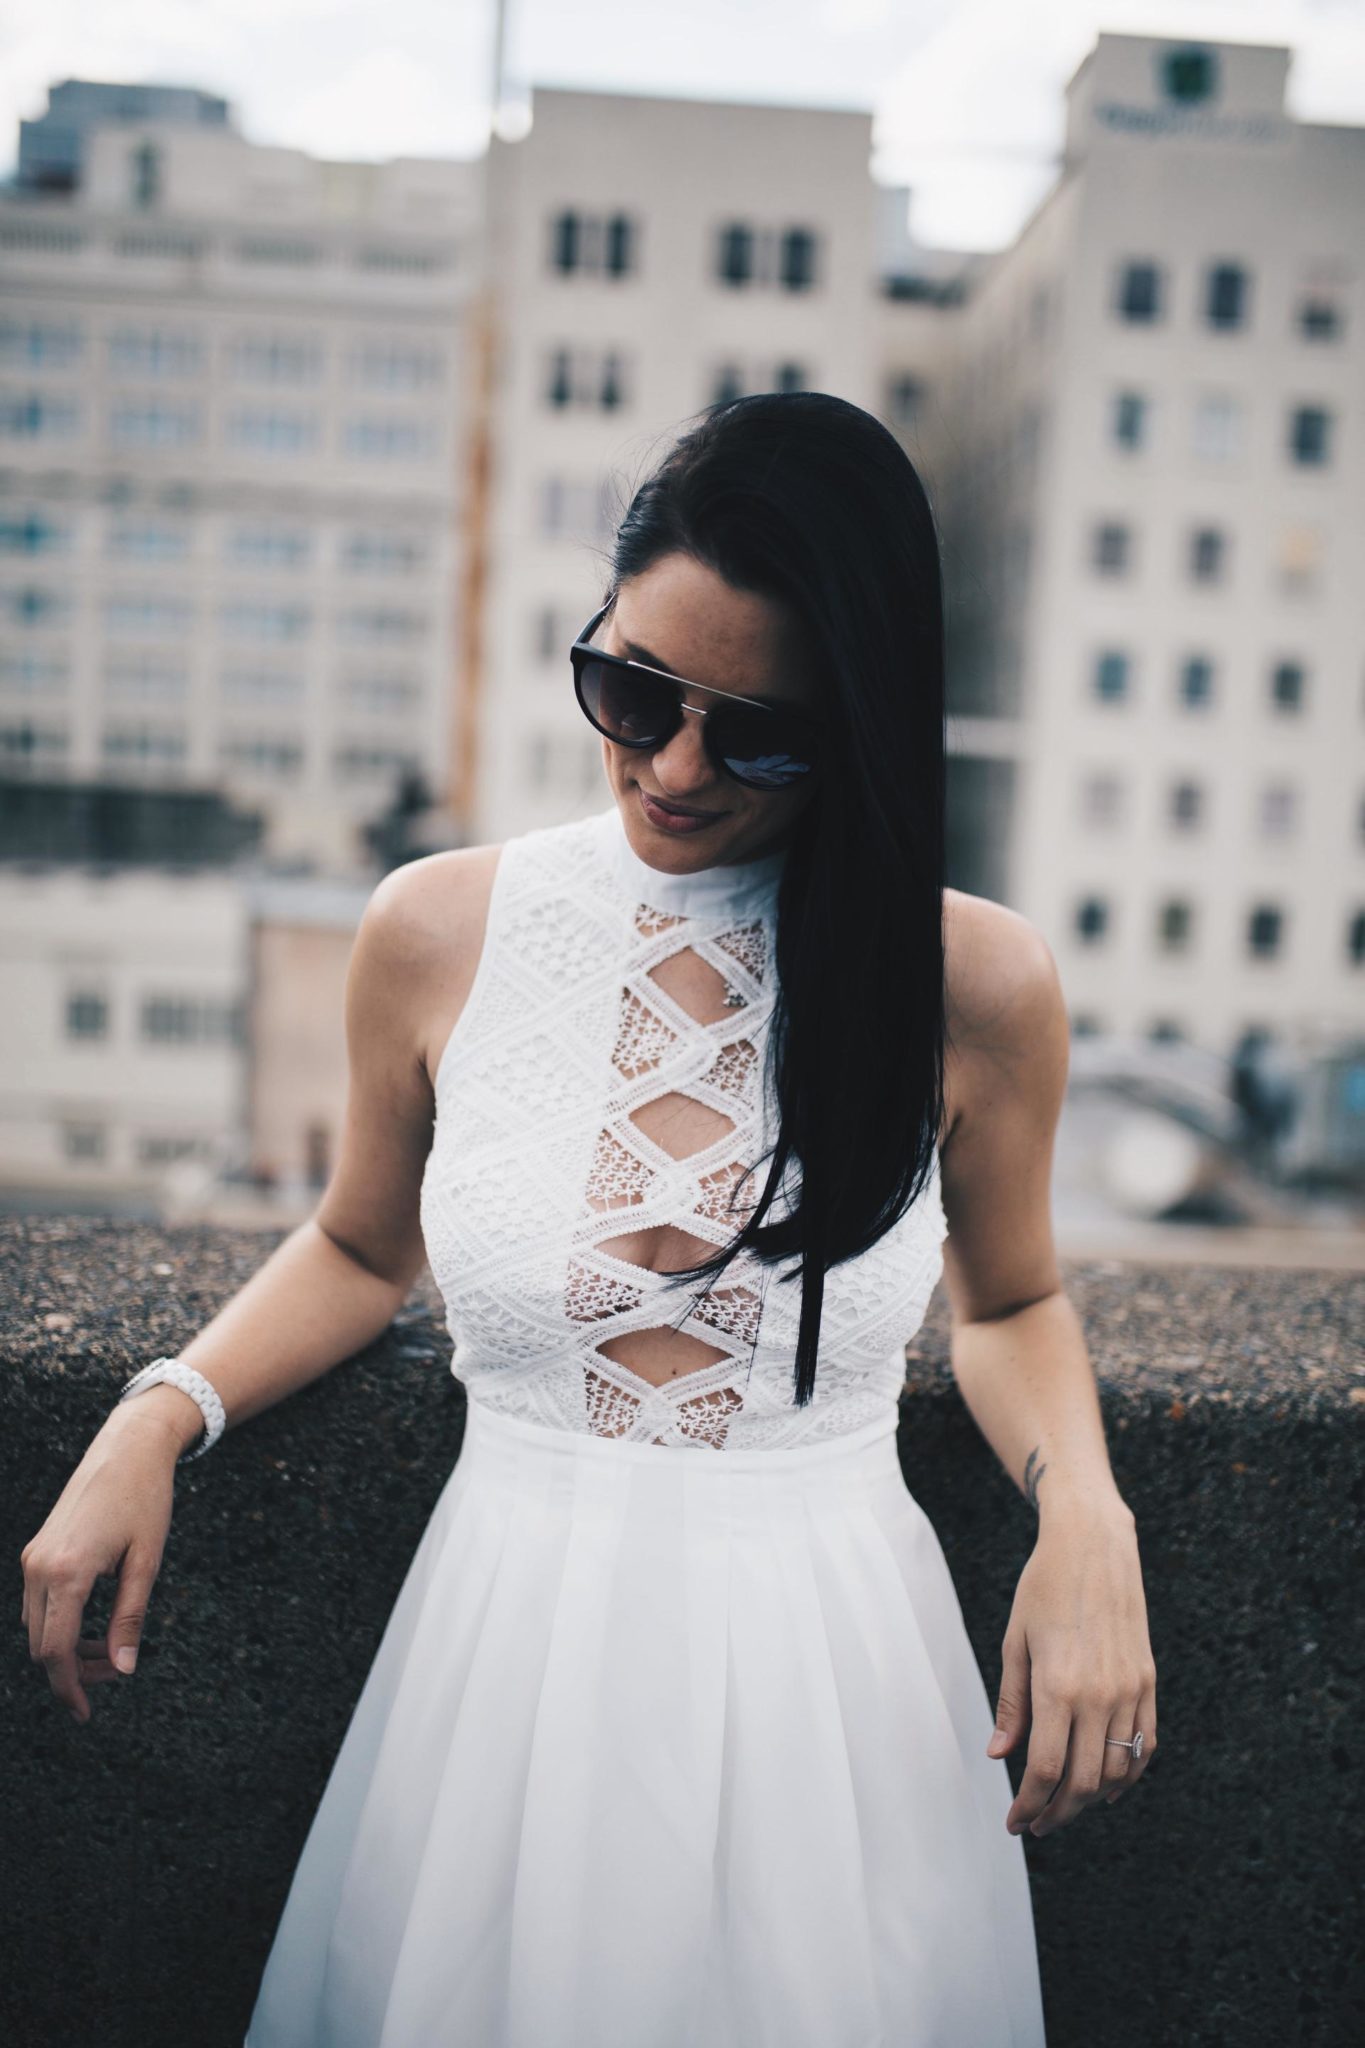 White Cutout Lace Dress | summer fashion tips | summer outfit ideas | summer style tips | what to wear for summer | warm weather fashion | fashion for summer | style tips for summer | outfit ideas for summer || Dressed to Kill